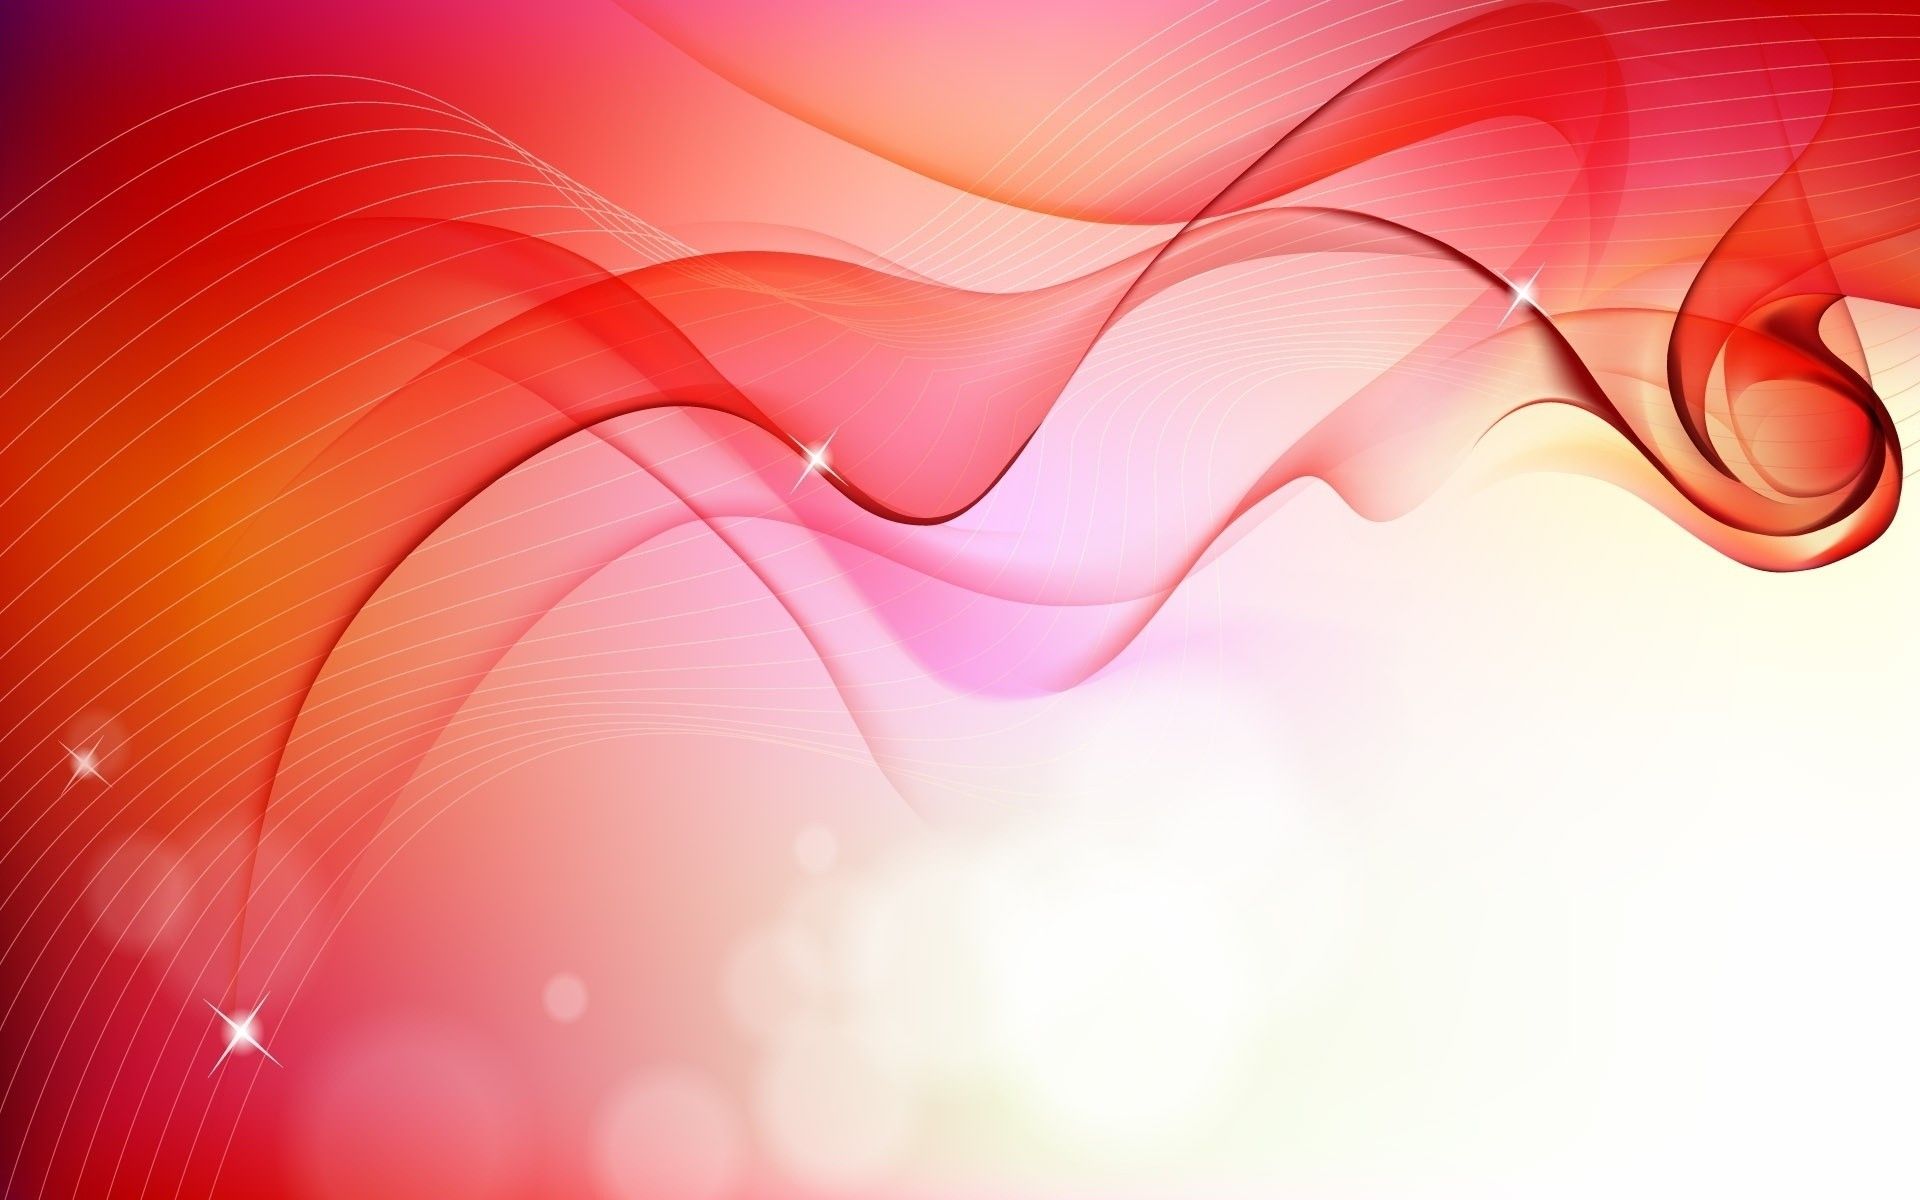 Download Wallpaper 1920x1200 Wavy, Red, White, Surface 1920x1200